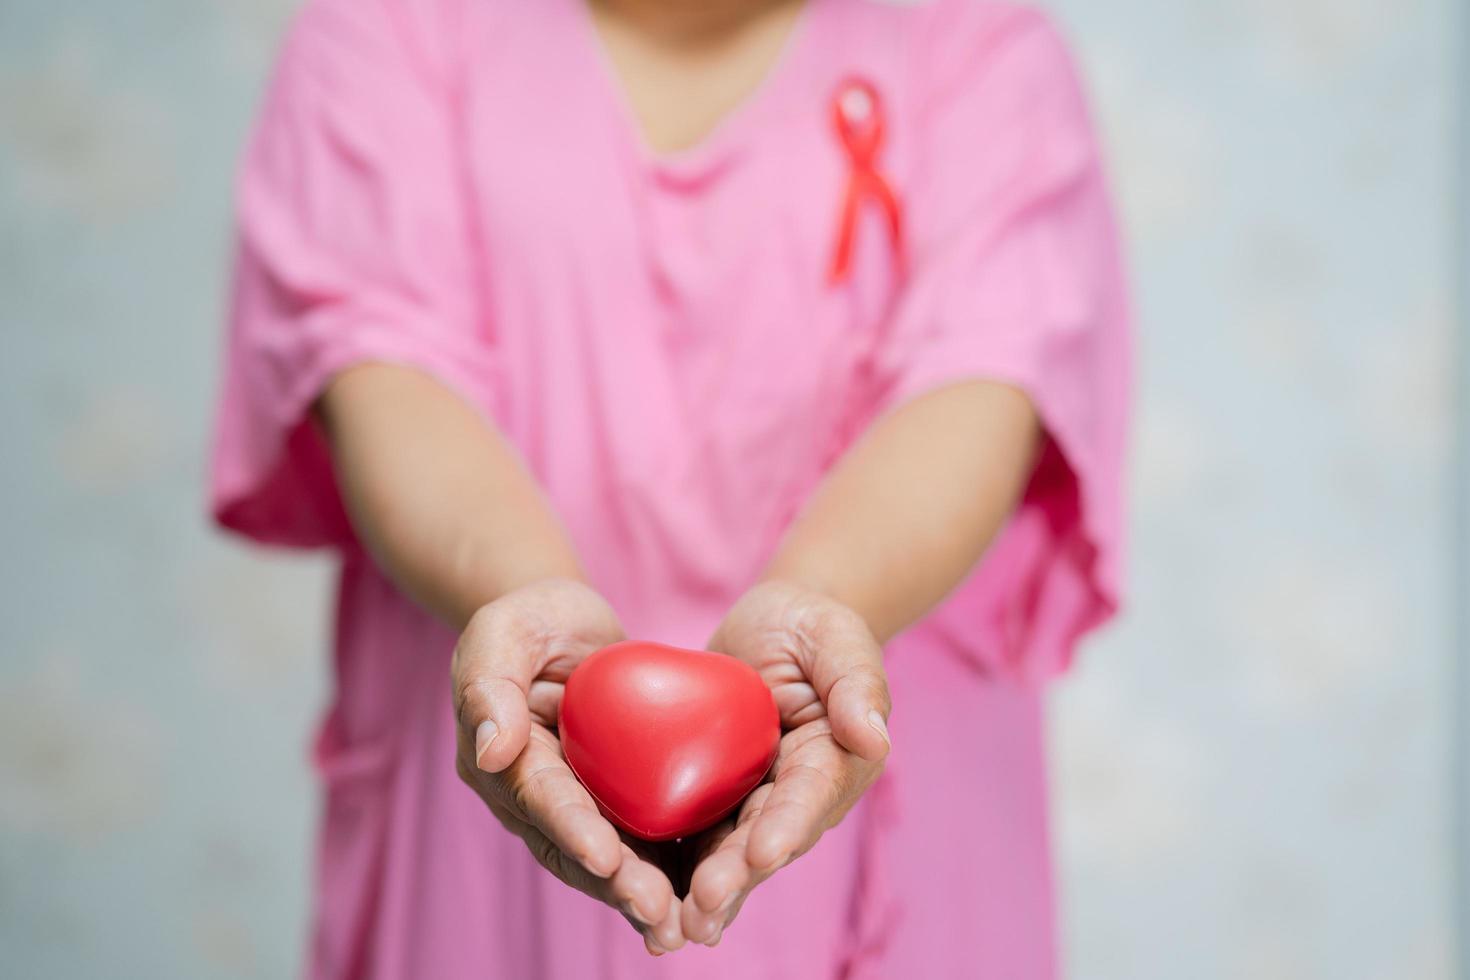 Asian lady woman patient holding red heart in hand at hospital, symbol of World Breast Cancer Day photo